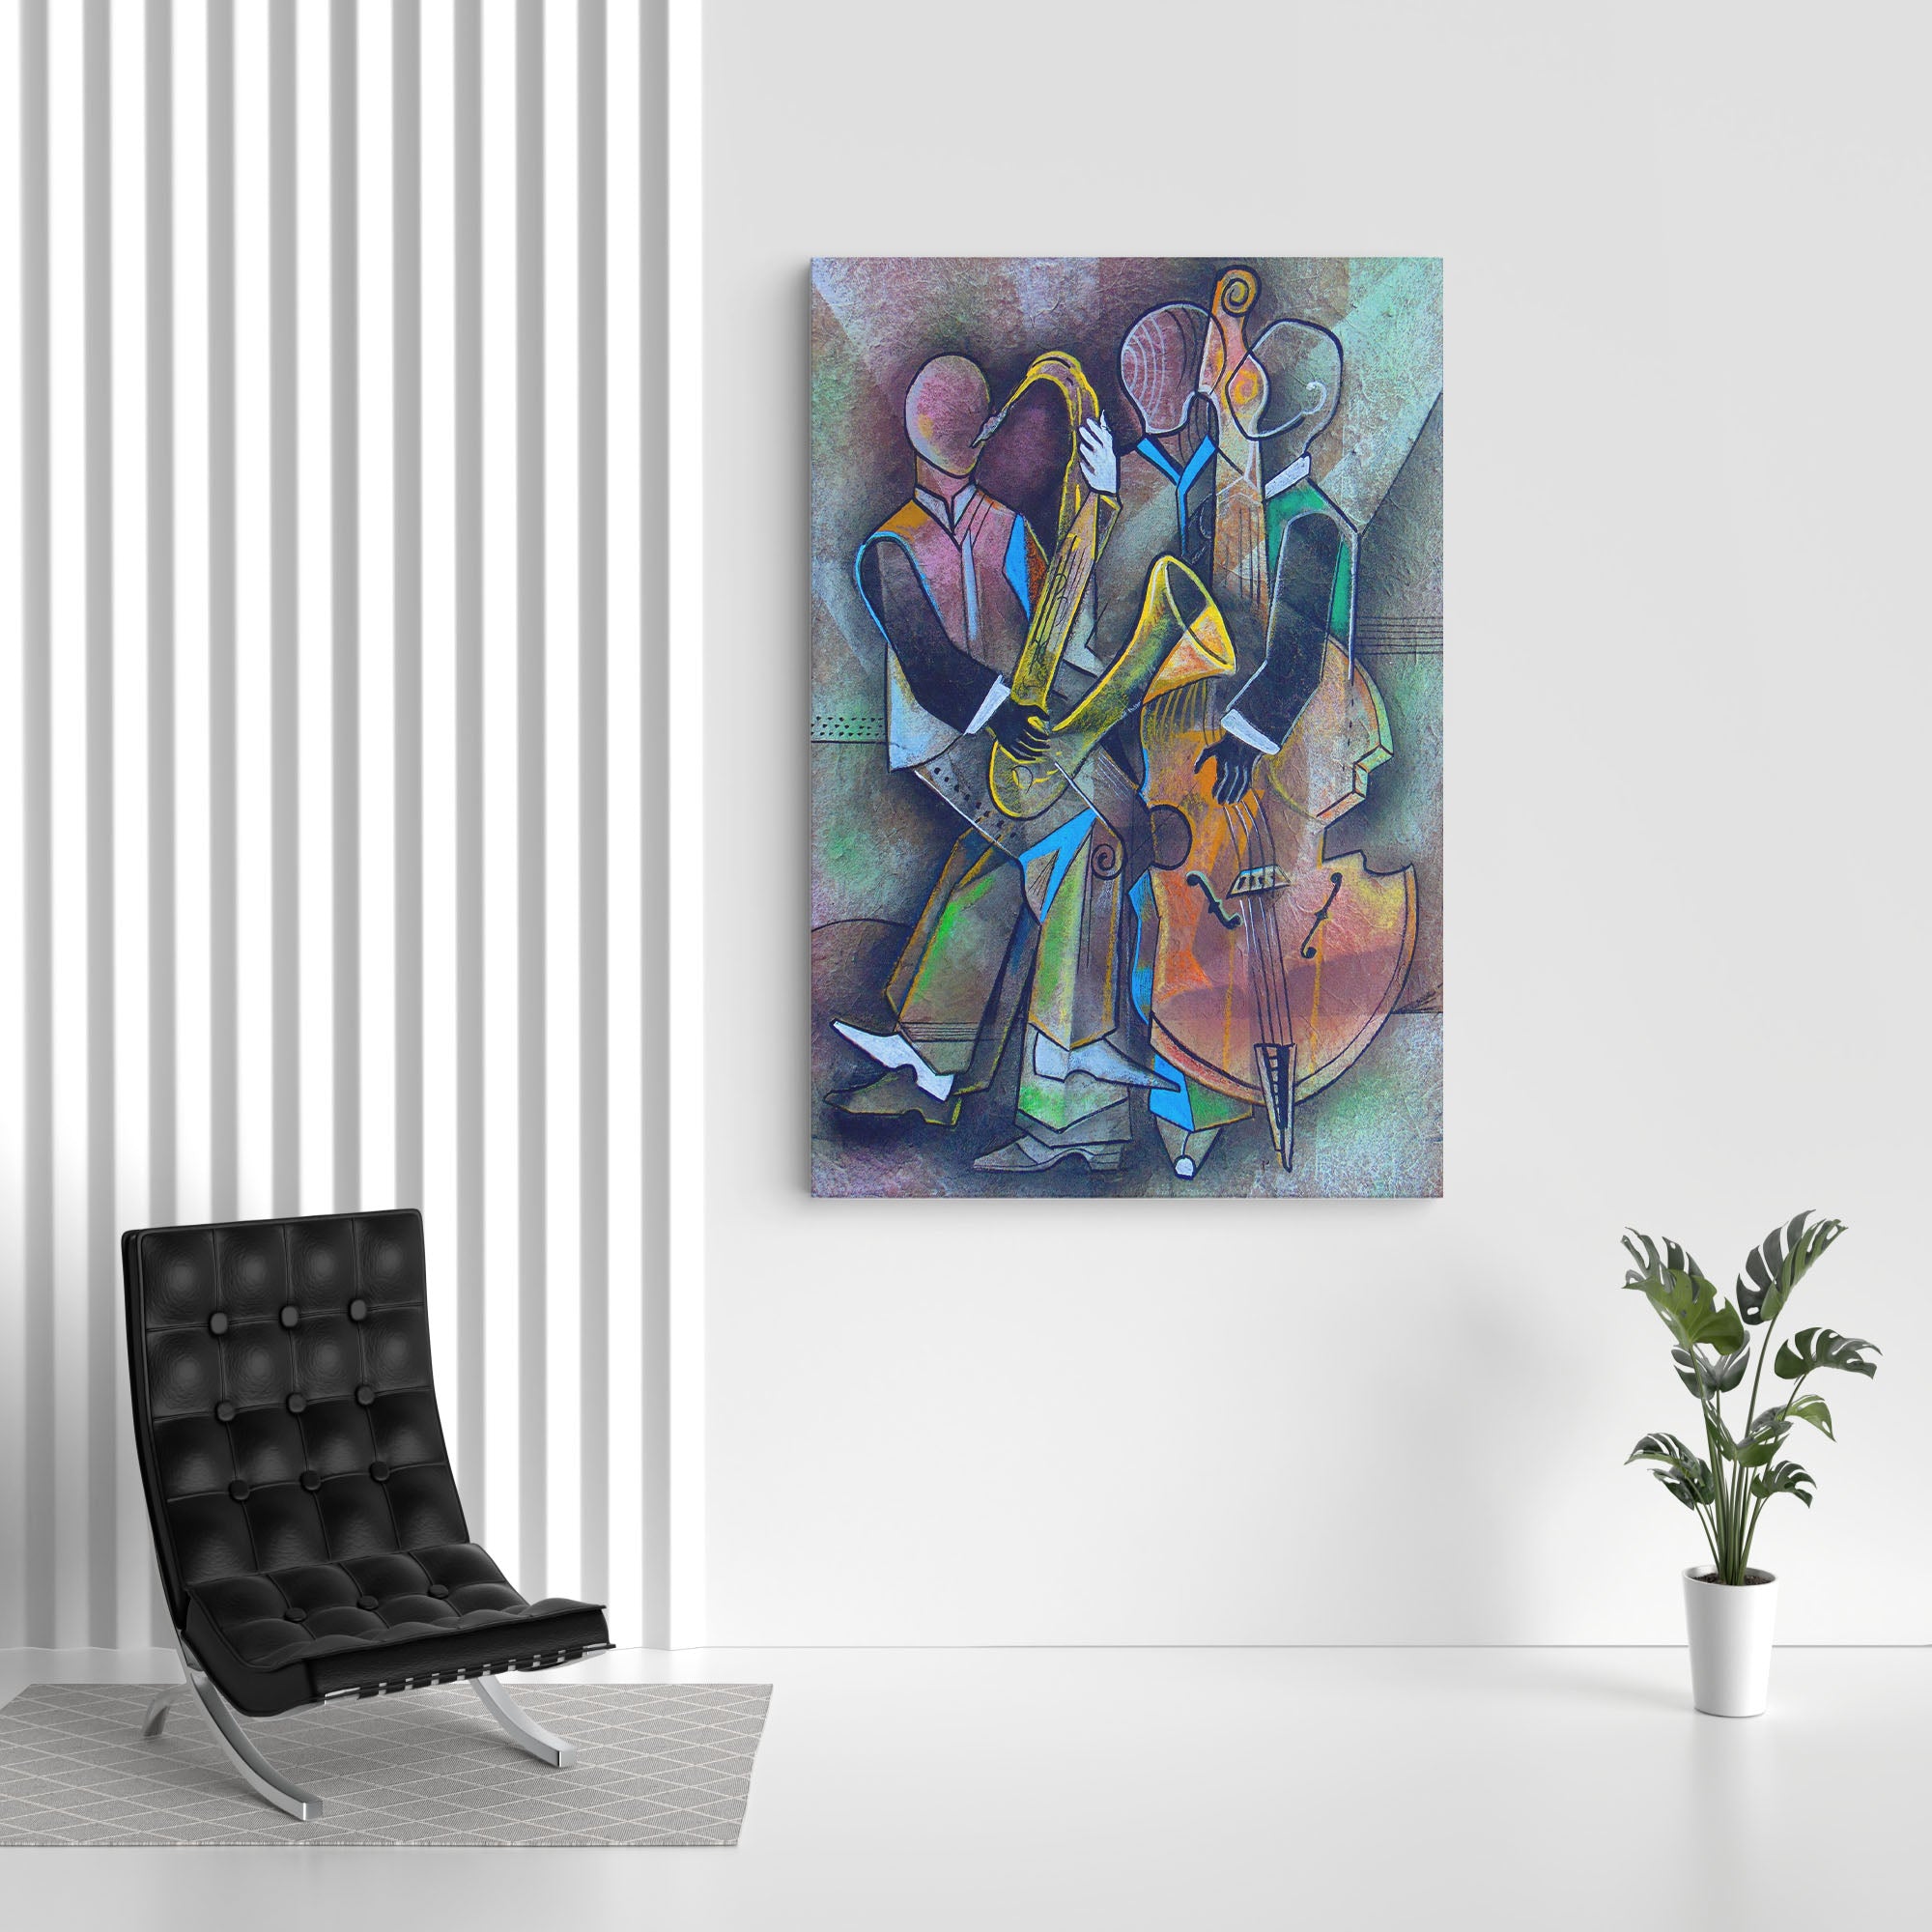 Musicians Cubism Picasso Style Artistic Abstract Canvas Wall Painting